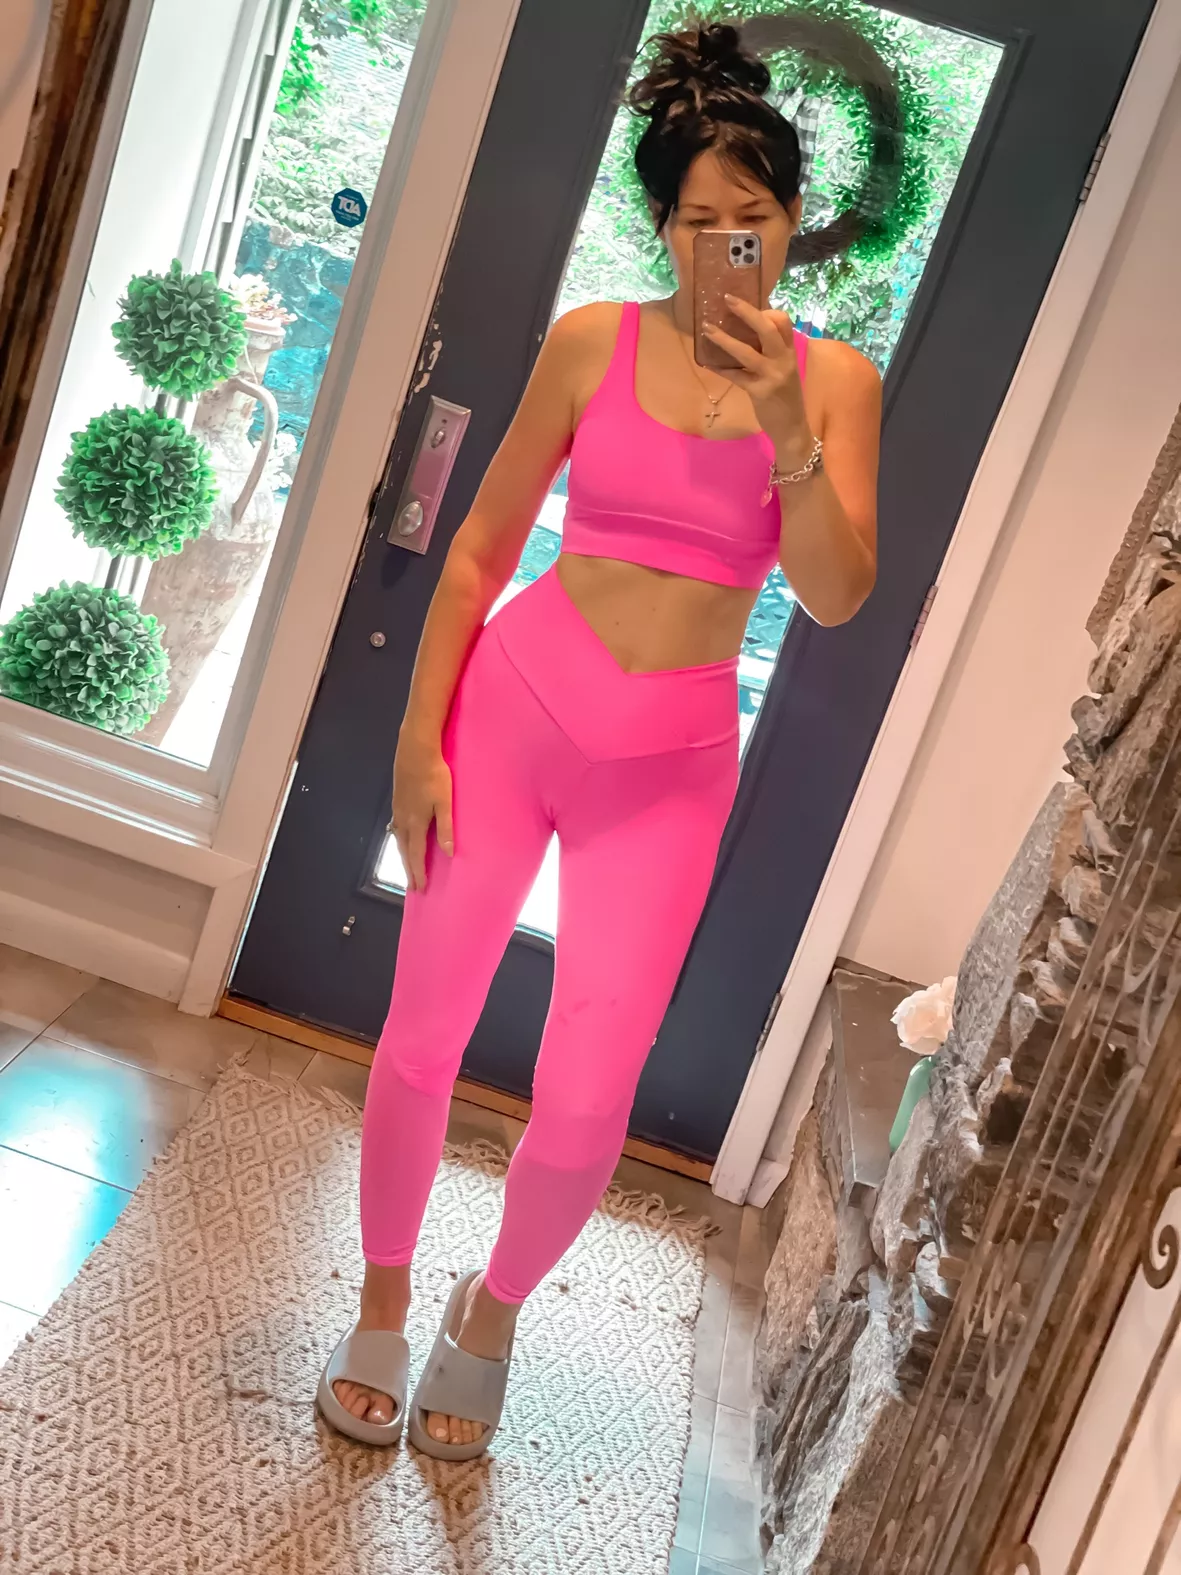 BARBIE PINK SEXY FITNESS LEGGINGS FOR WOMEN